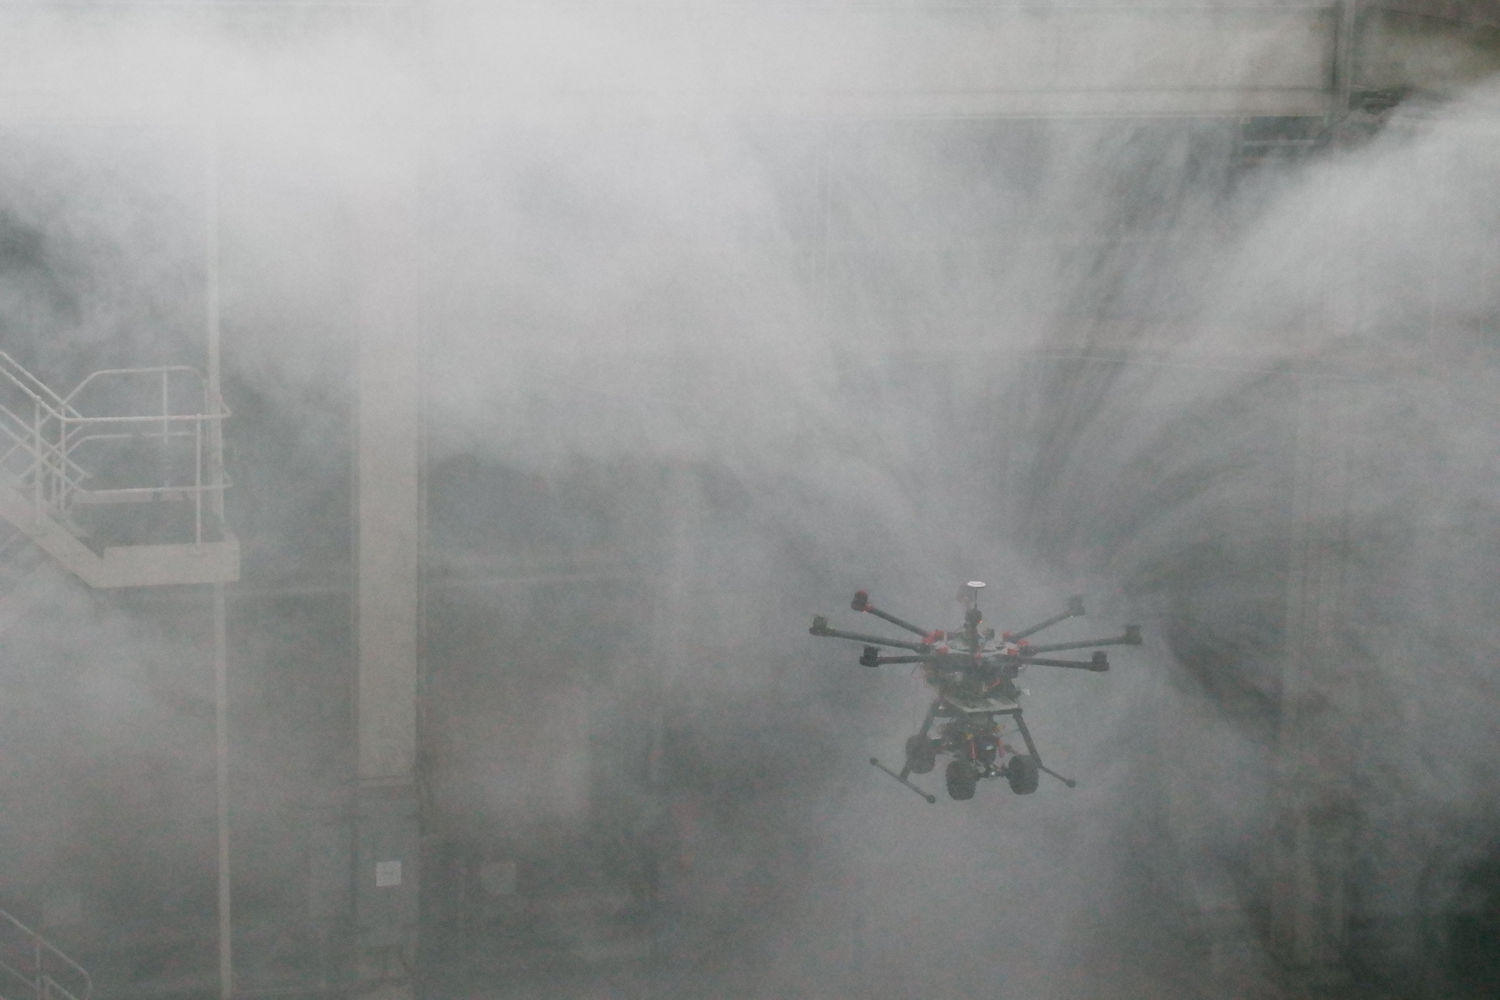 Self-Repairing Cities flies high to map future for UK drones